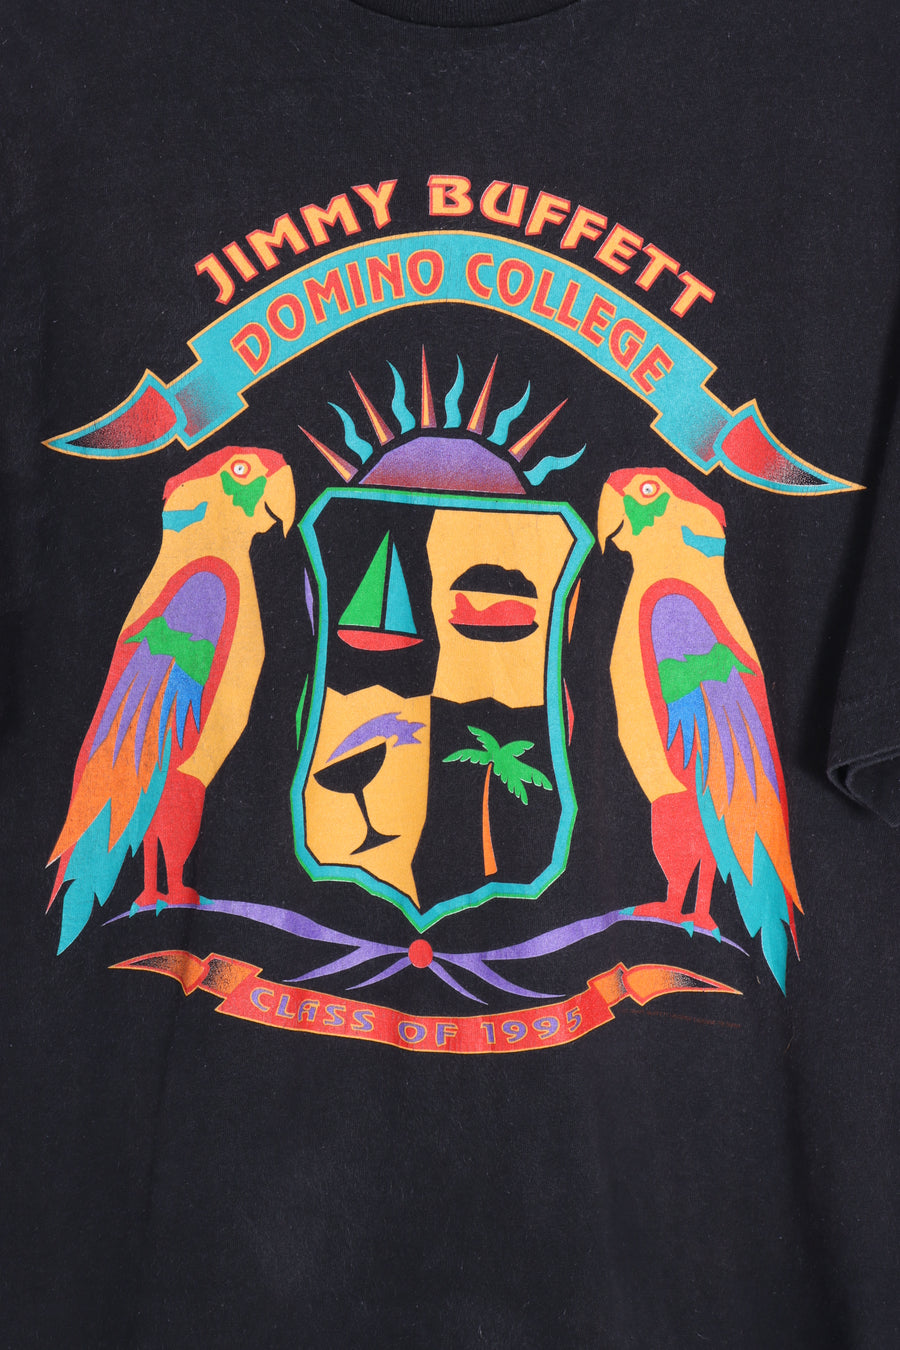 Vintage 1995 Jimmy Buffett Domino College Class of 95 Colourful Tee USA Made (XL)